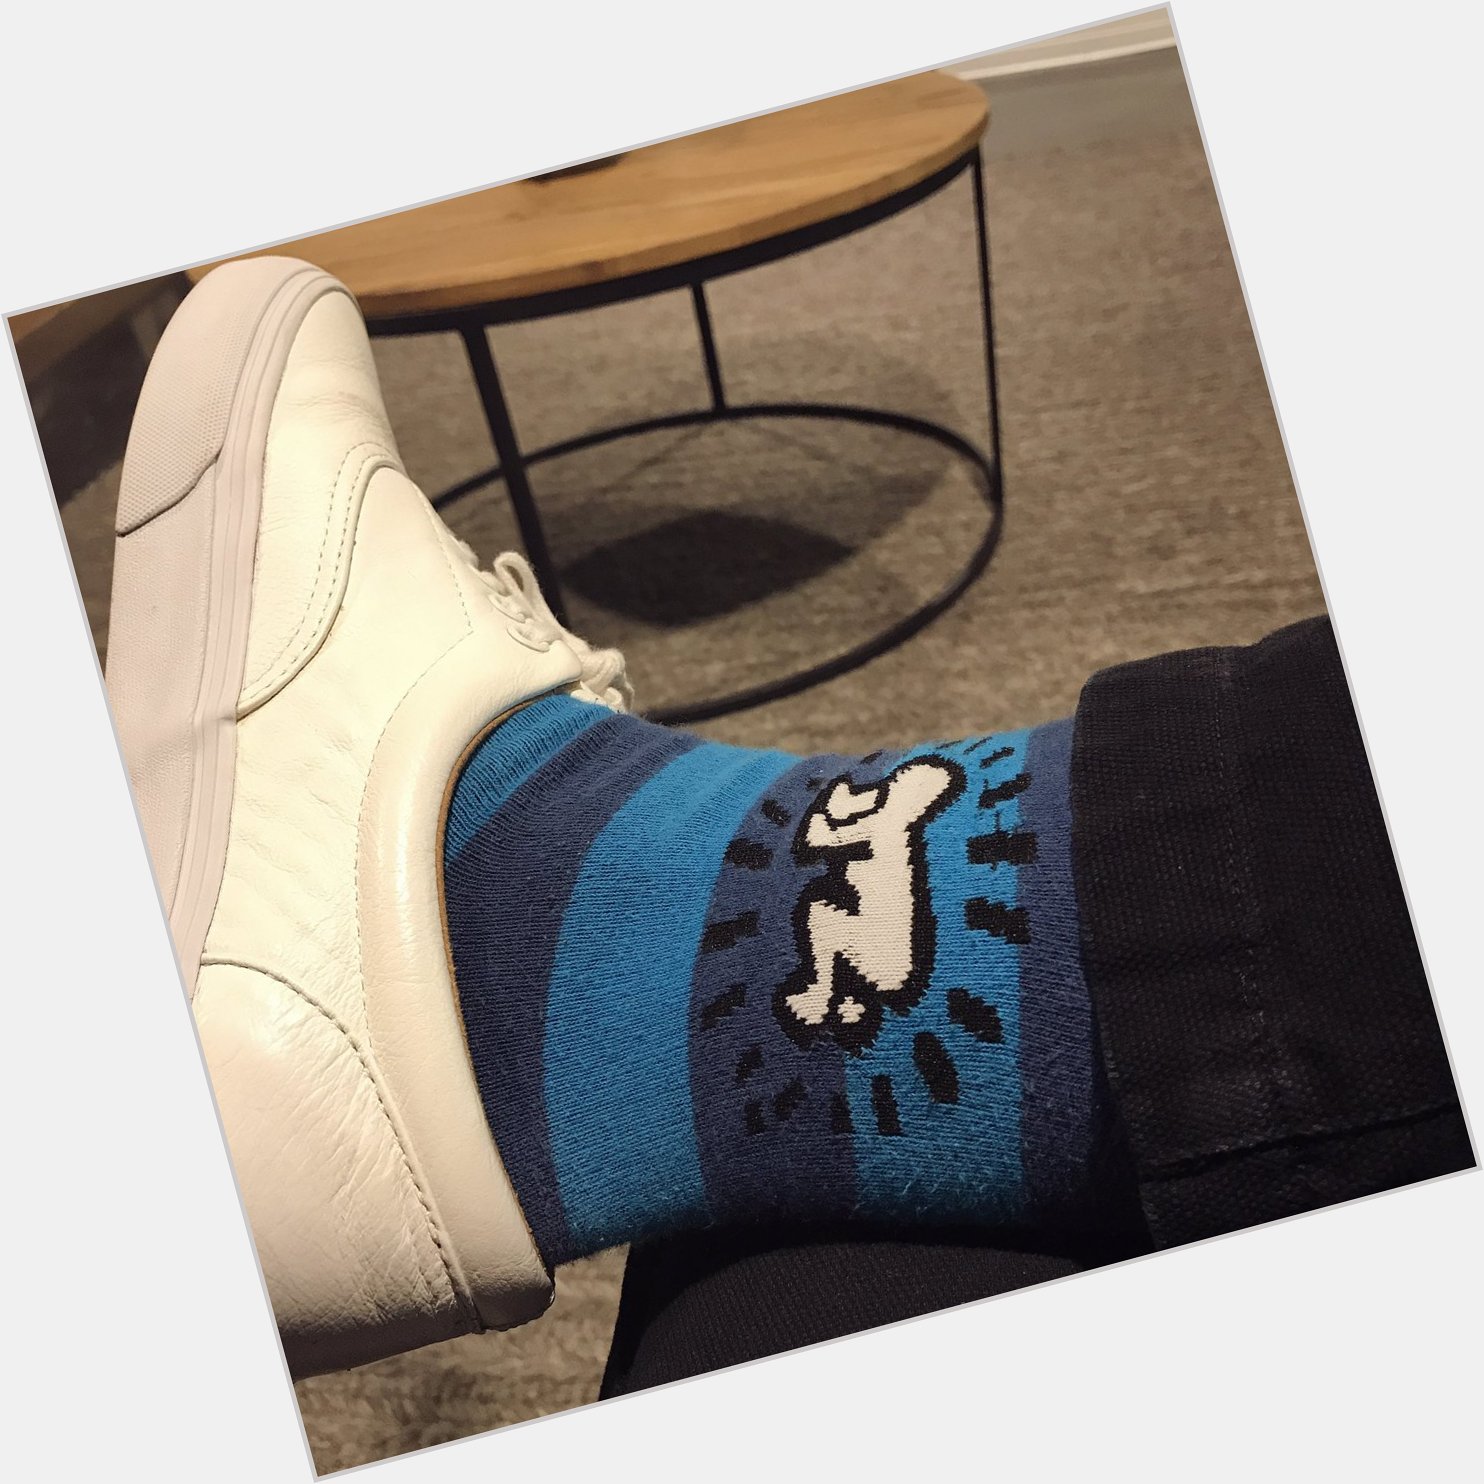 Happy 59th birthday, Keith Haring! Got my \"Radiant Baby\" socks on in honor of you today   